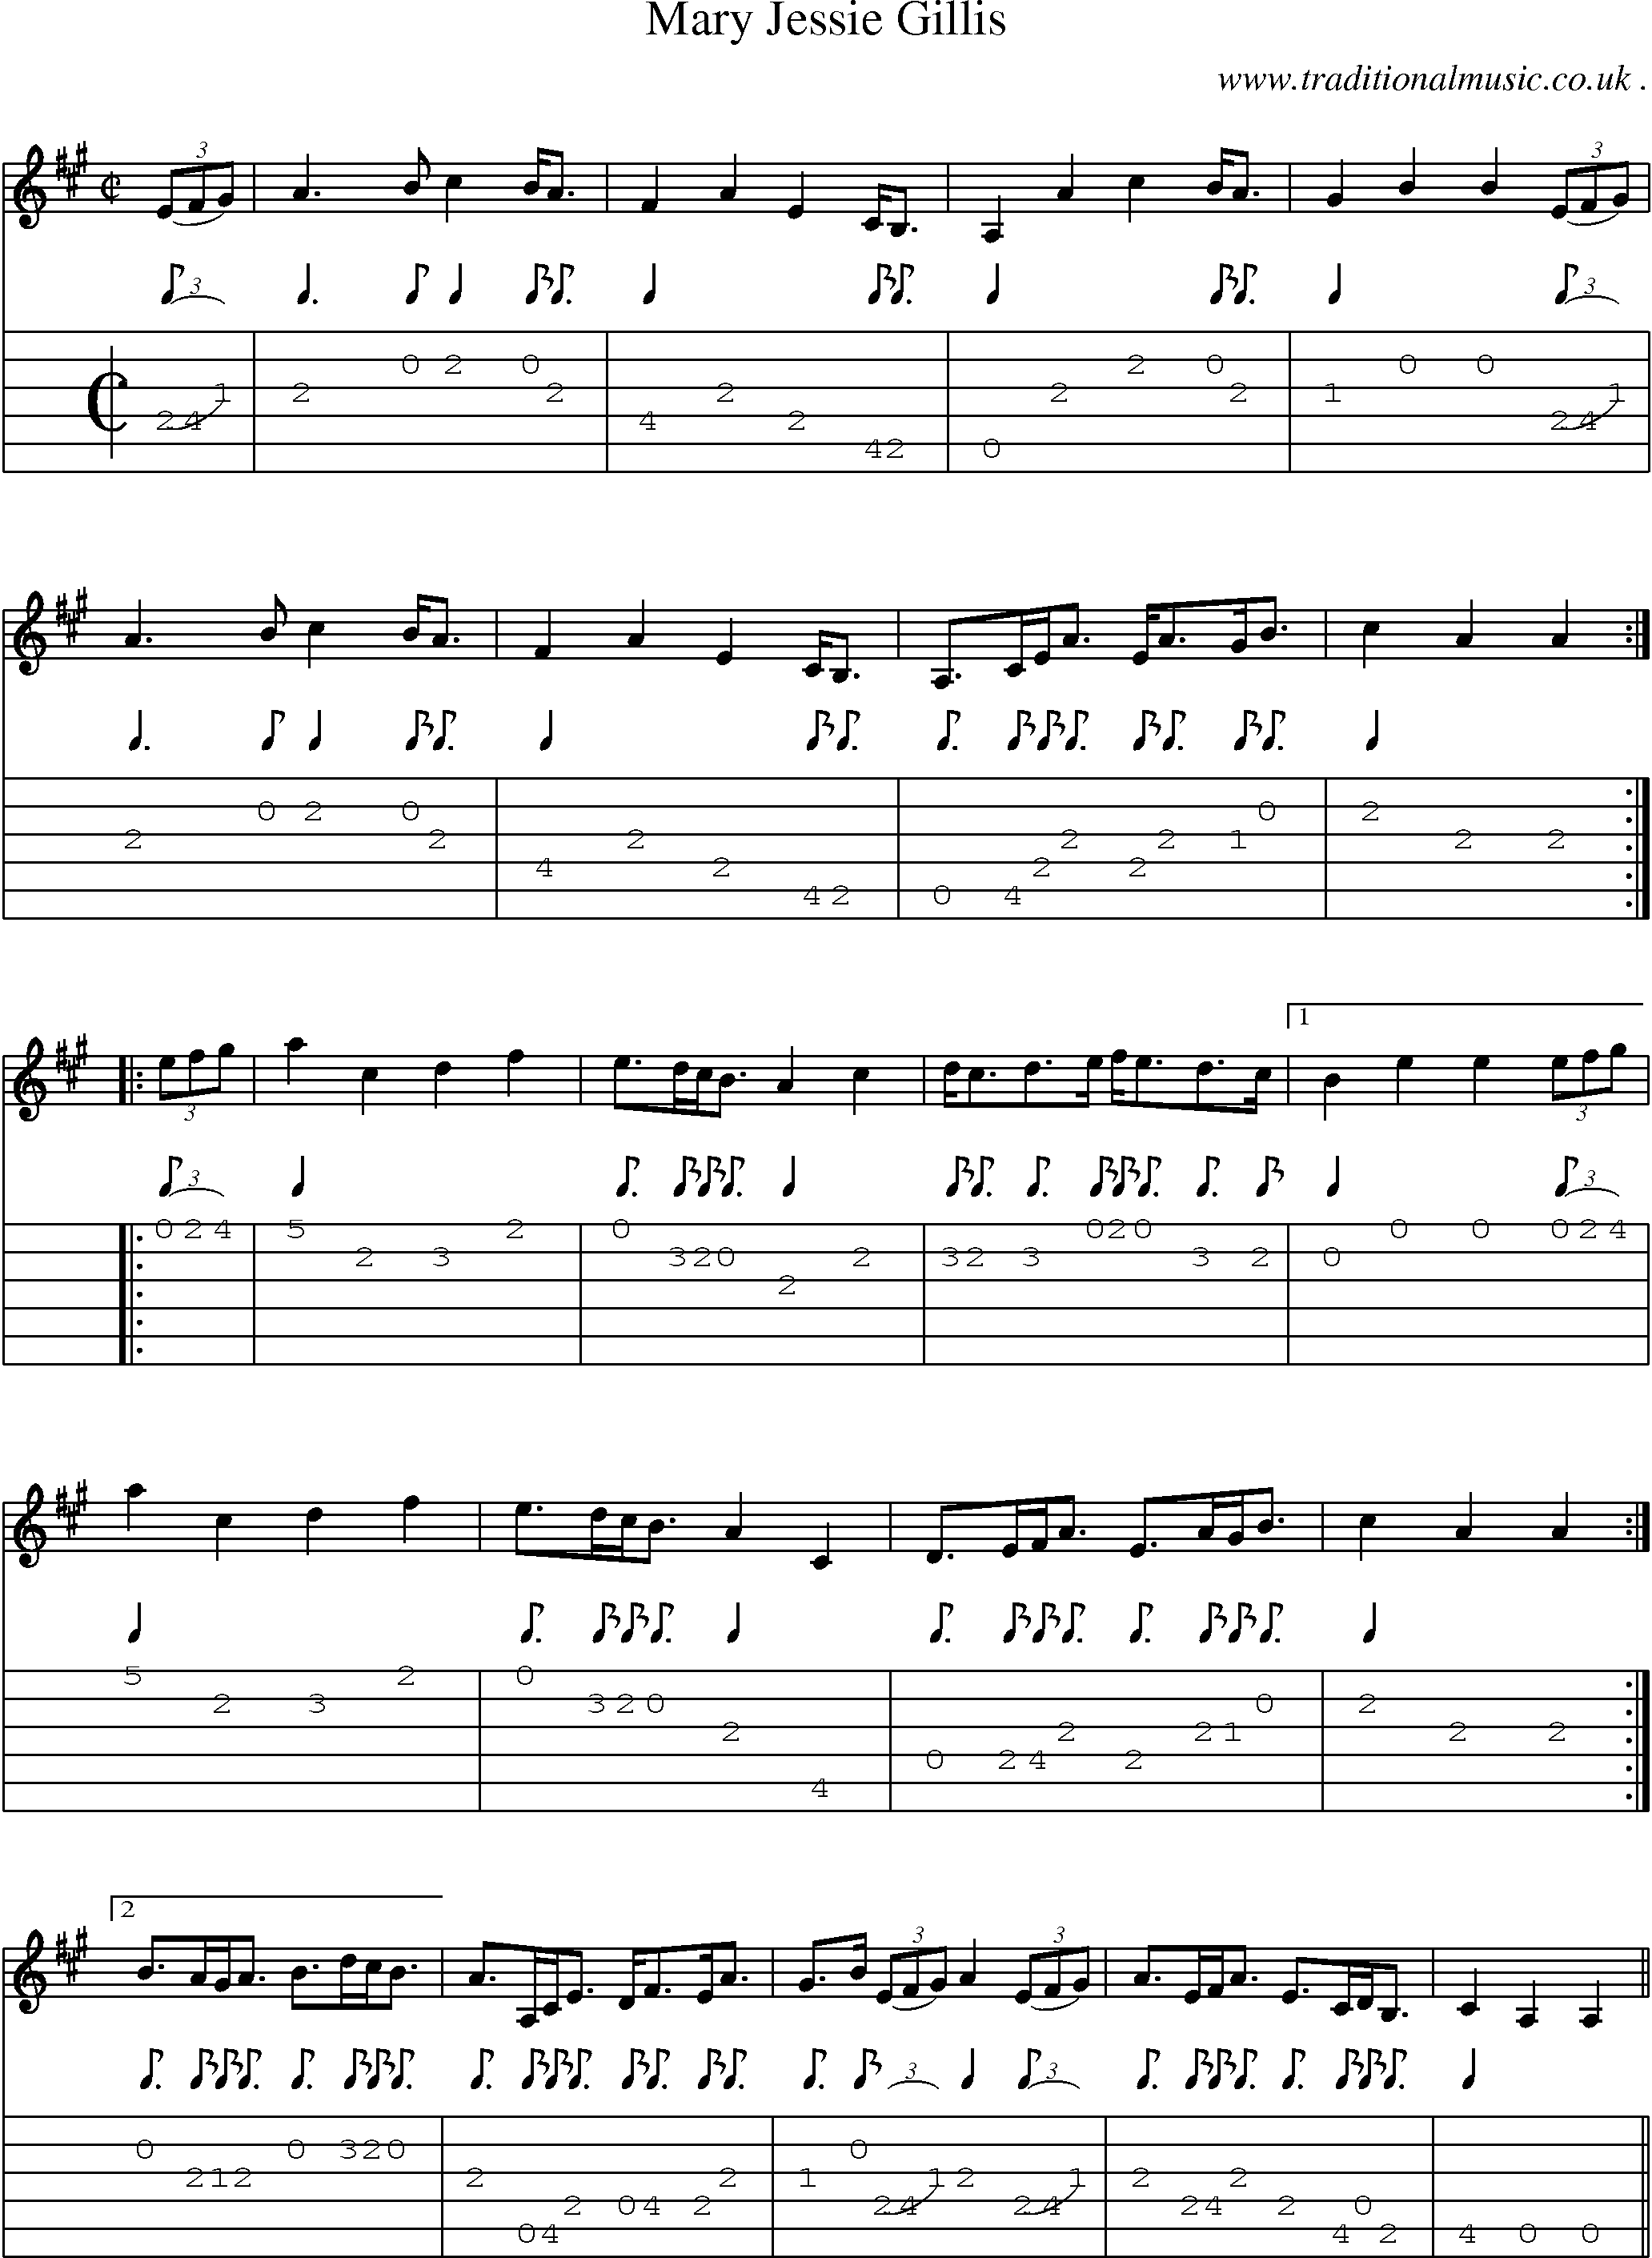 Sheet-Music and Guitar Tabs for Mary Jessie Gillis